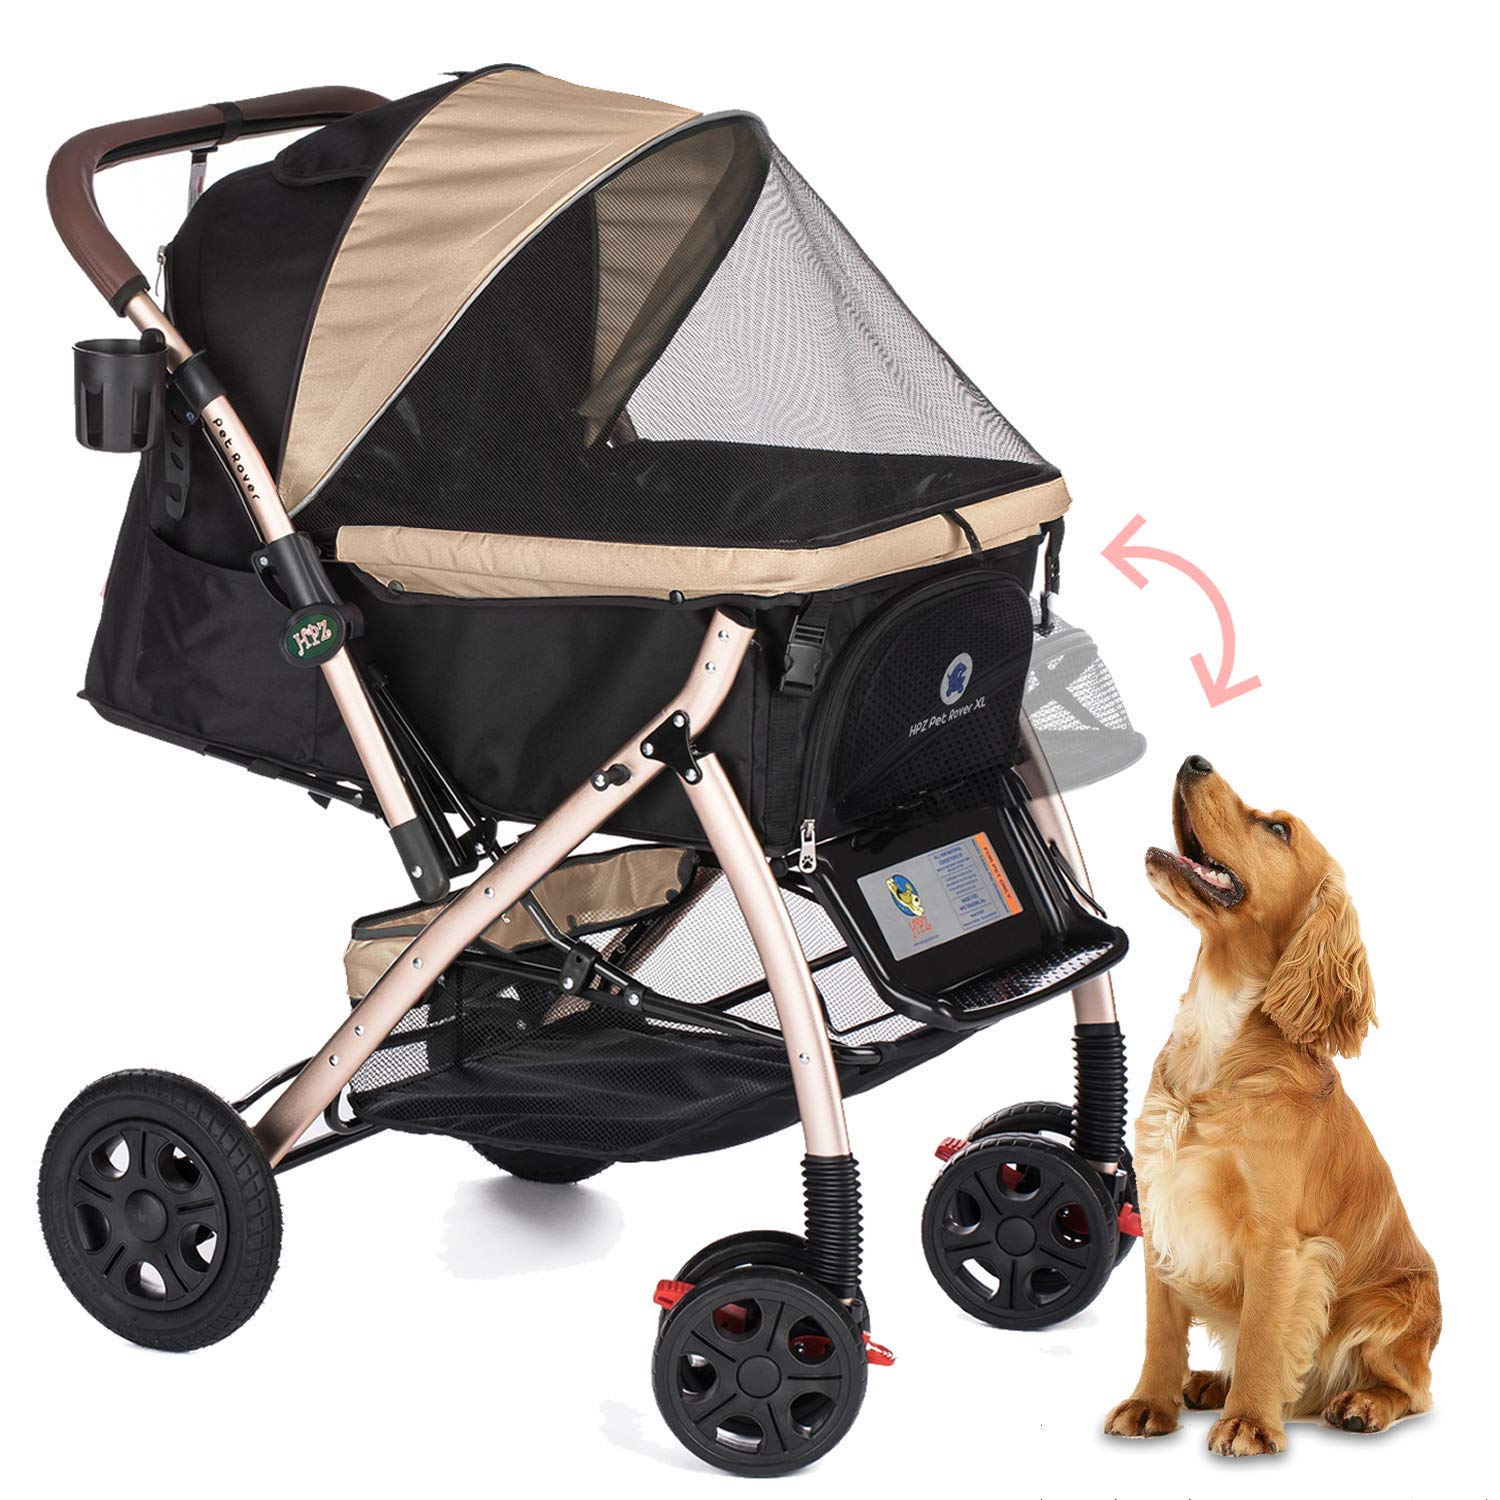 HPZ-PR America HPZ Pet Rover XL Extra-Long Premium Heavy Duty DogcatPet Stroller Travel carriage for Small Medium Large Pets (Taupe 2nd-gen)